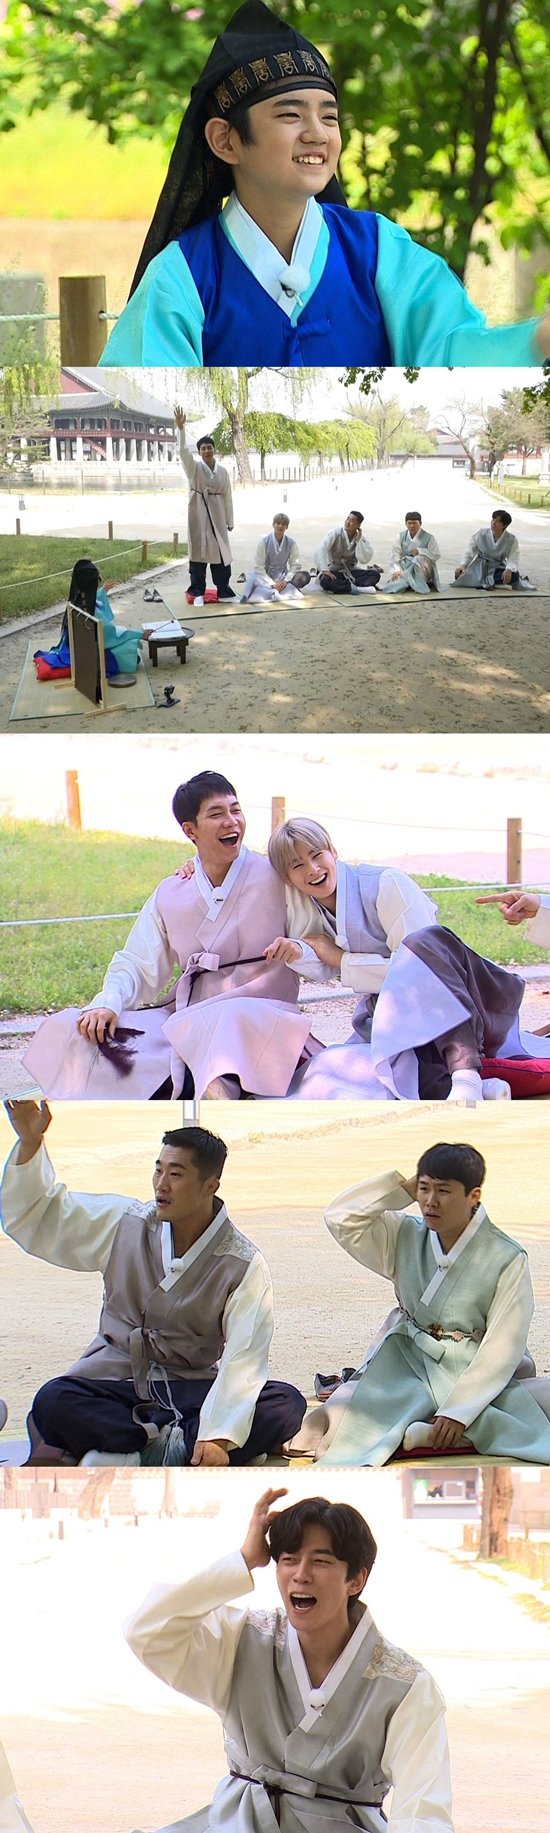 On SBS All The Butlers, which is broadcasted at 6:25 pm on the 2nd, a special Haru with Master Gyeongbokgung will be released.After looking back at Gyeongbokgung, All The Butlers king selection of the Wang-match of all the palaces was held.The quiz by Goodbye My Princess (Kim Kang-hoon) about Gyoungbokgung decided to identify the members who deserve to become kings.In order to sit on the throne, there is a fierce competition more than ever, raising questions about the result.In the meantime, unexpected situations occurred in front of the members who felt the joy and sorrow of Master Gyongbokgung while looking around the palace.Goodbye My Princess (Kim Kang-hoon), who had a good time together, suddenly disappeared.The members once again looked back at Gyoungbokgung to find Goodbye My Princess (Kim Kang-hoon).What would have happened to the members and Goodbye My Princess, Haru, who is meaningful with Master Gyeongbokgung, will be released at All The Butlers, which will be broadcasted at 6:25 pm on the 2nd.